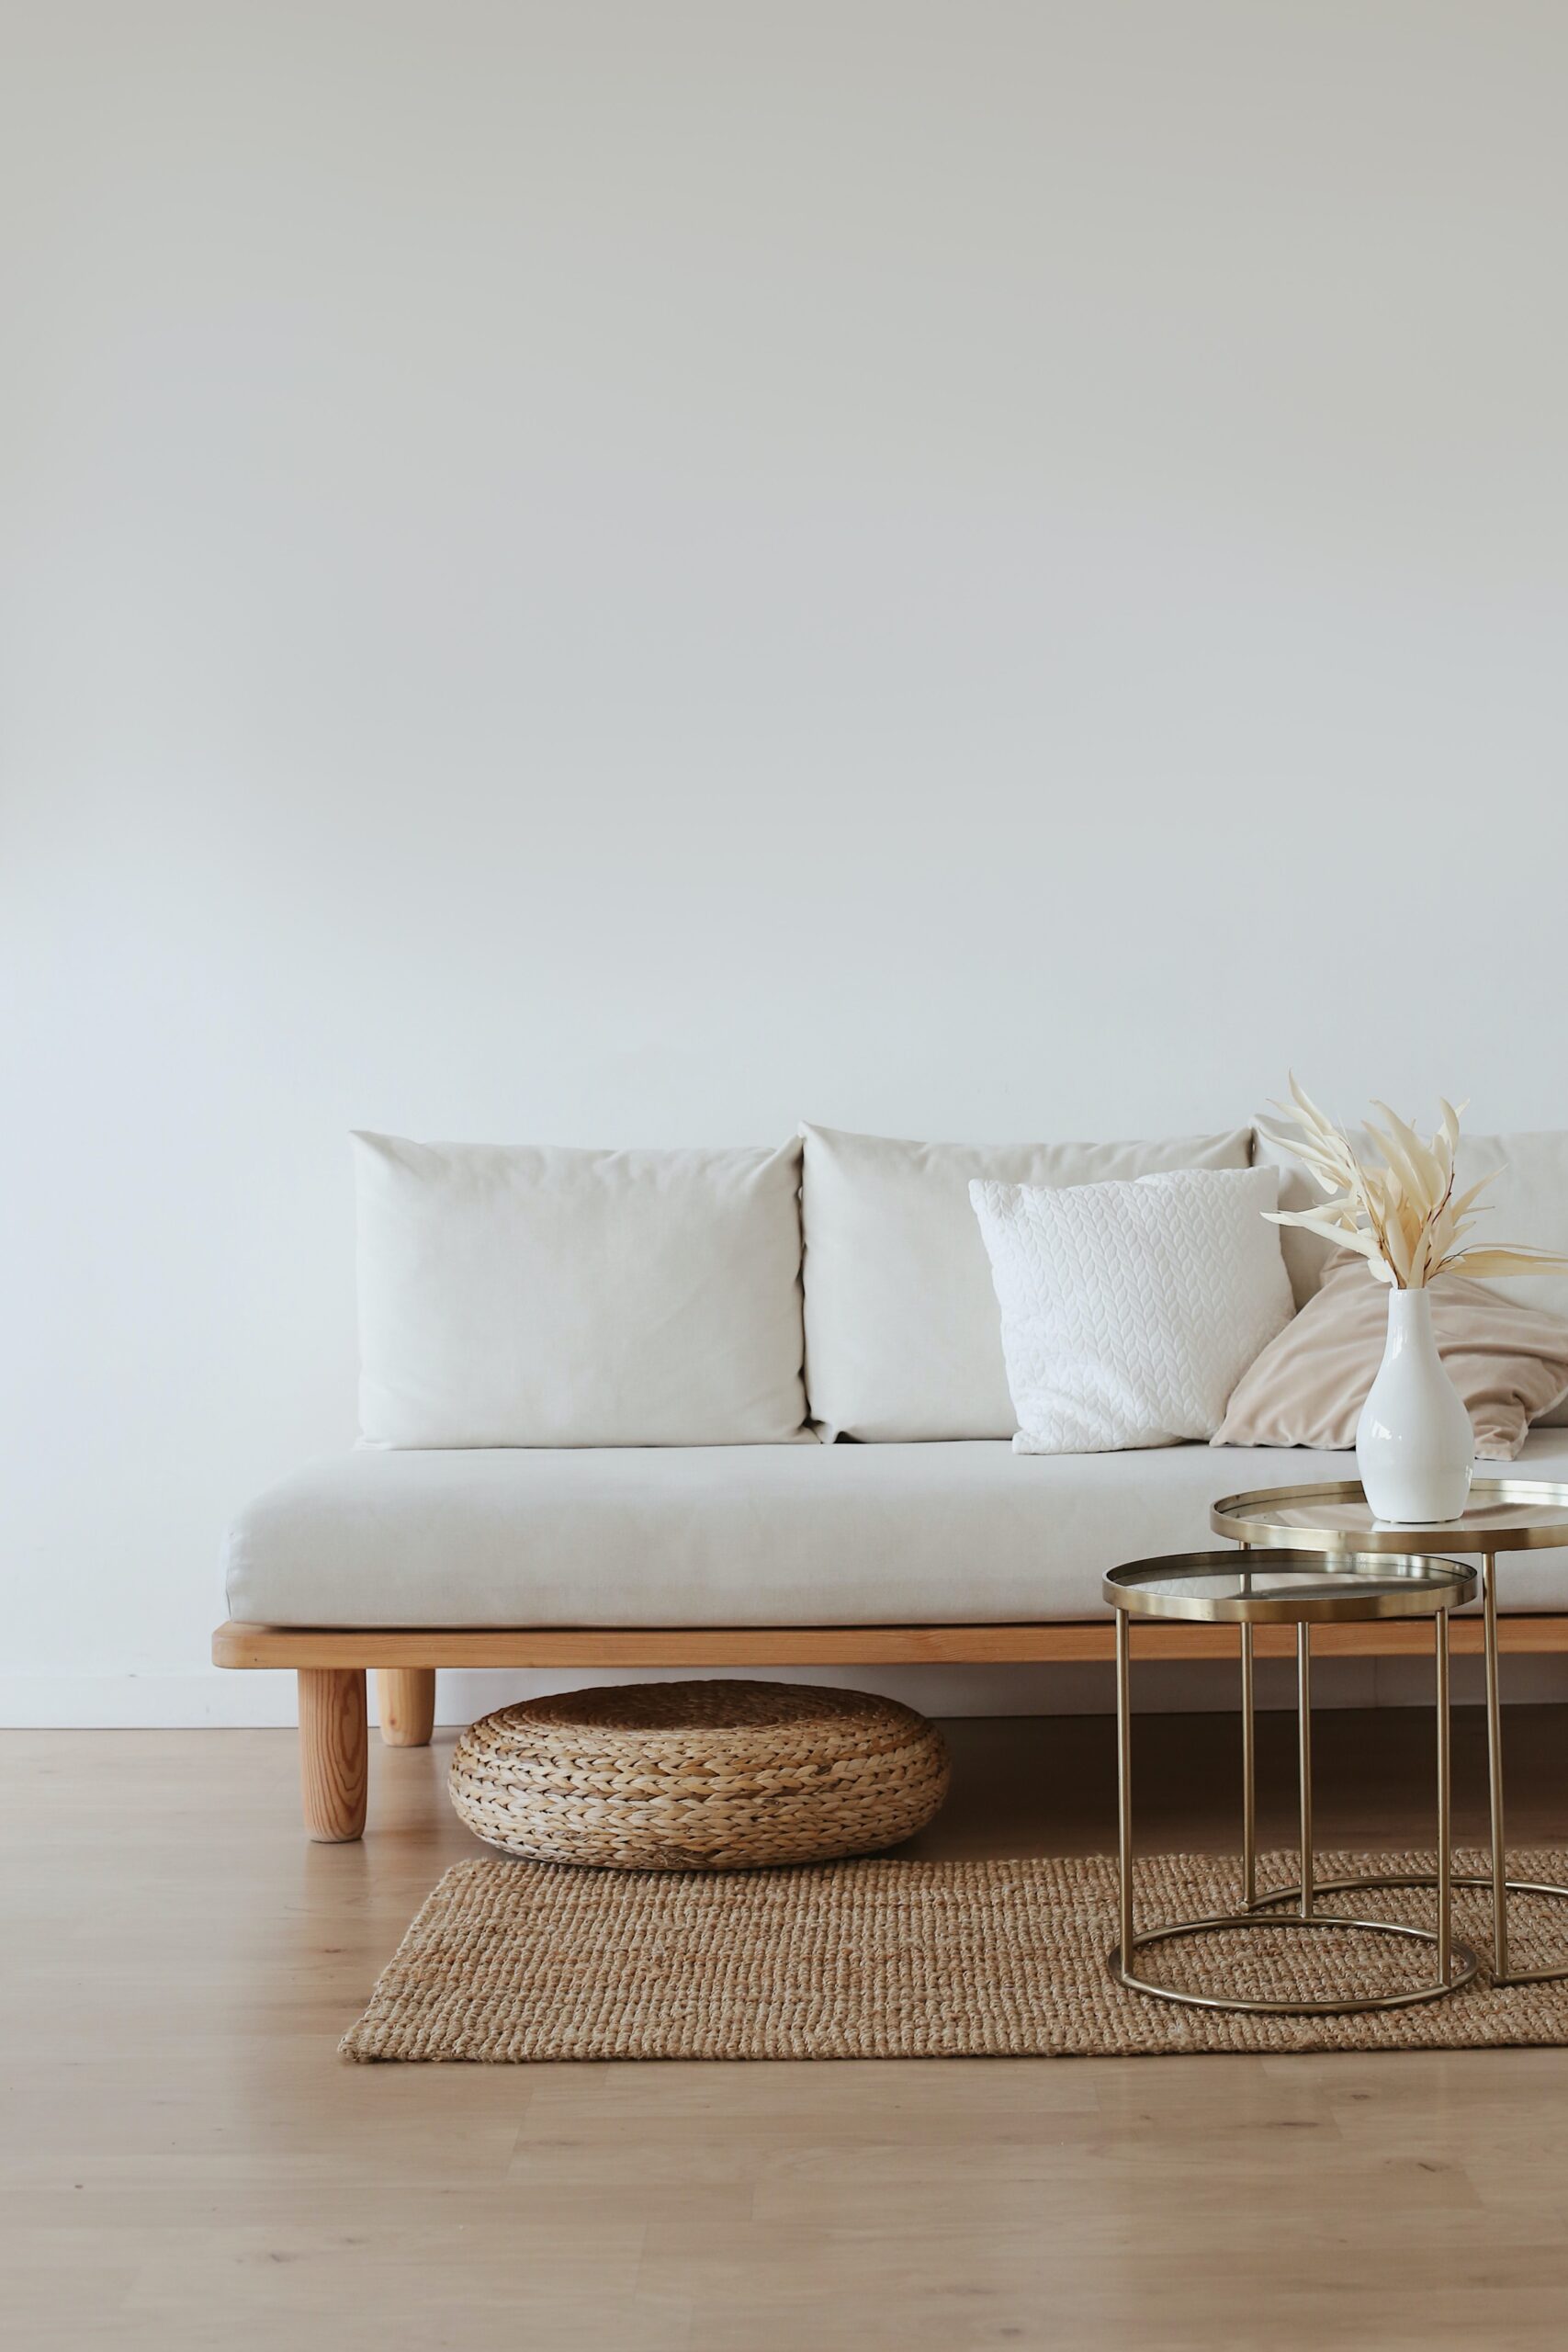 A wooden couch with white cushions image